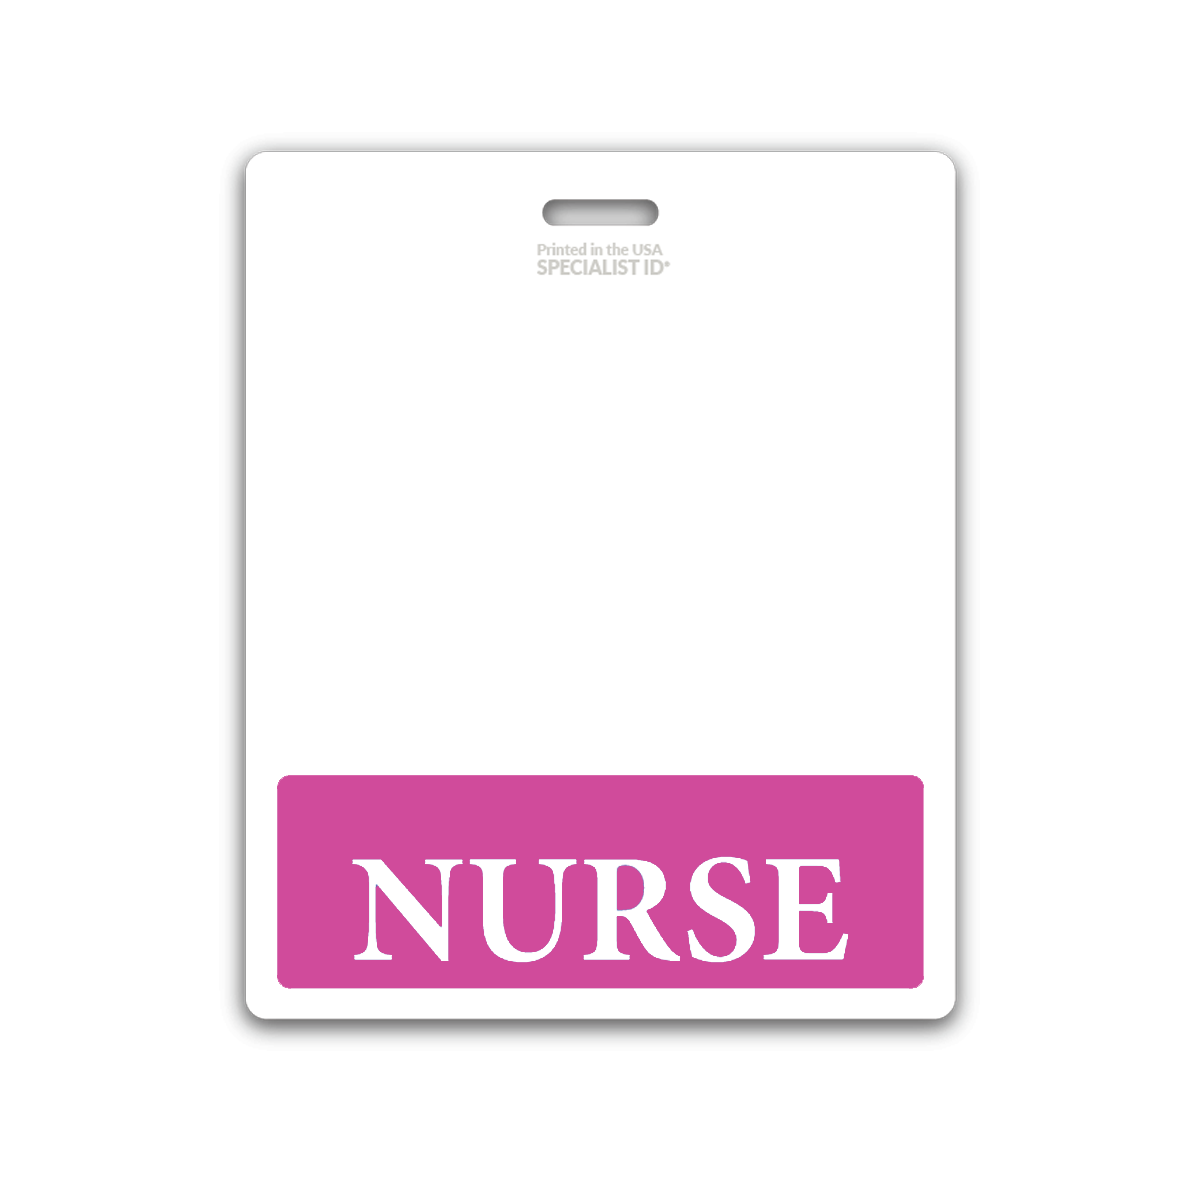 Extra Large and Long Nurse Badge Buddy with Hot Pink Border - Double Side Print